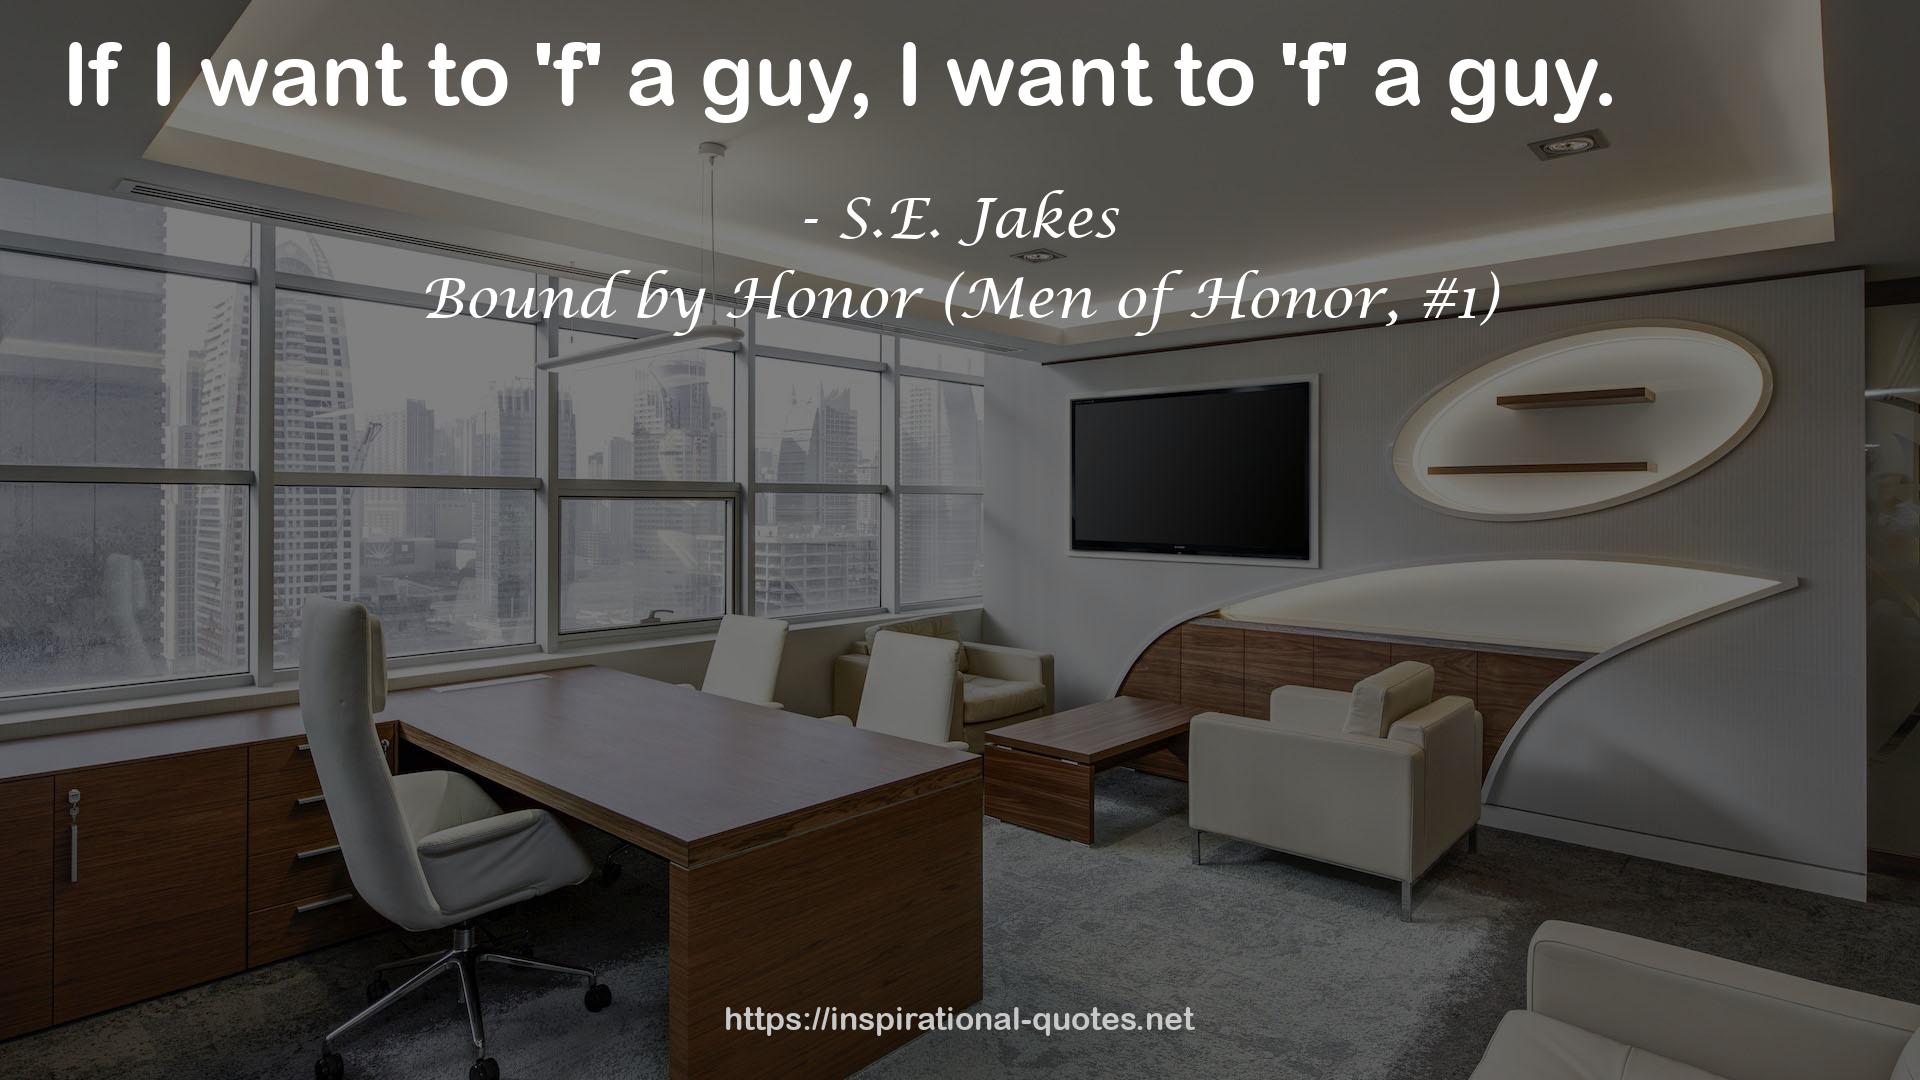 S.E. Jakes QUOTES